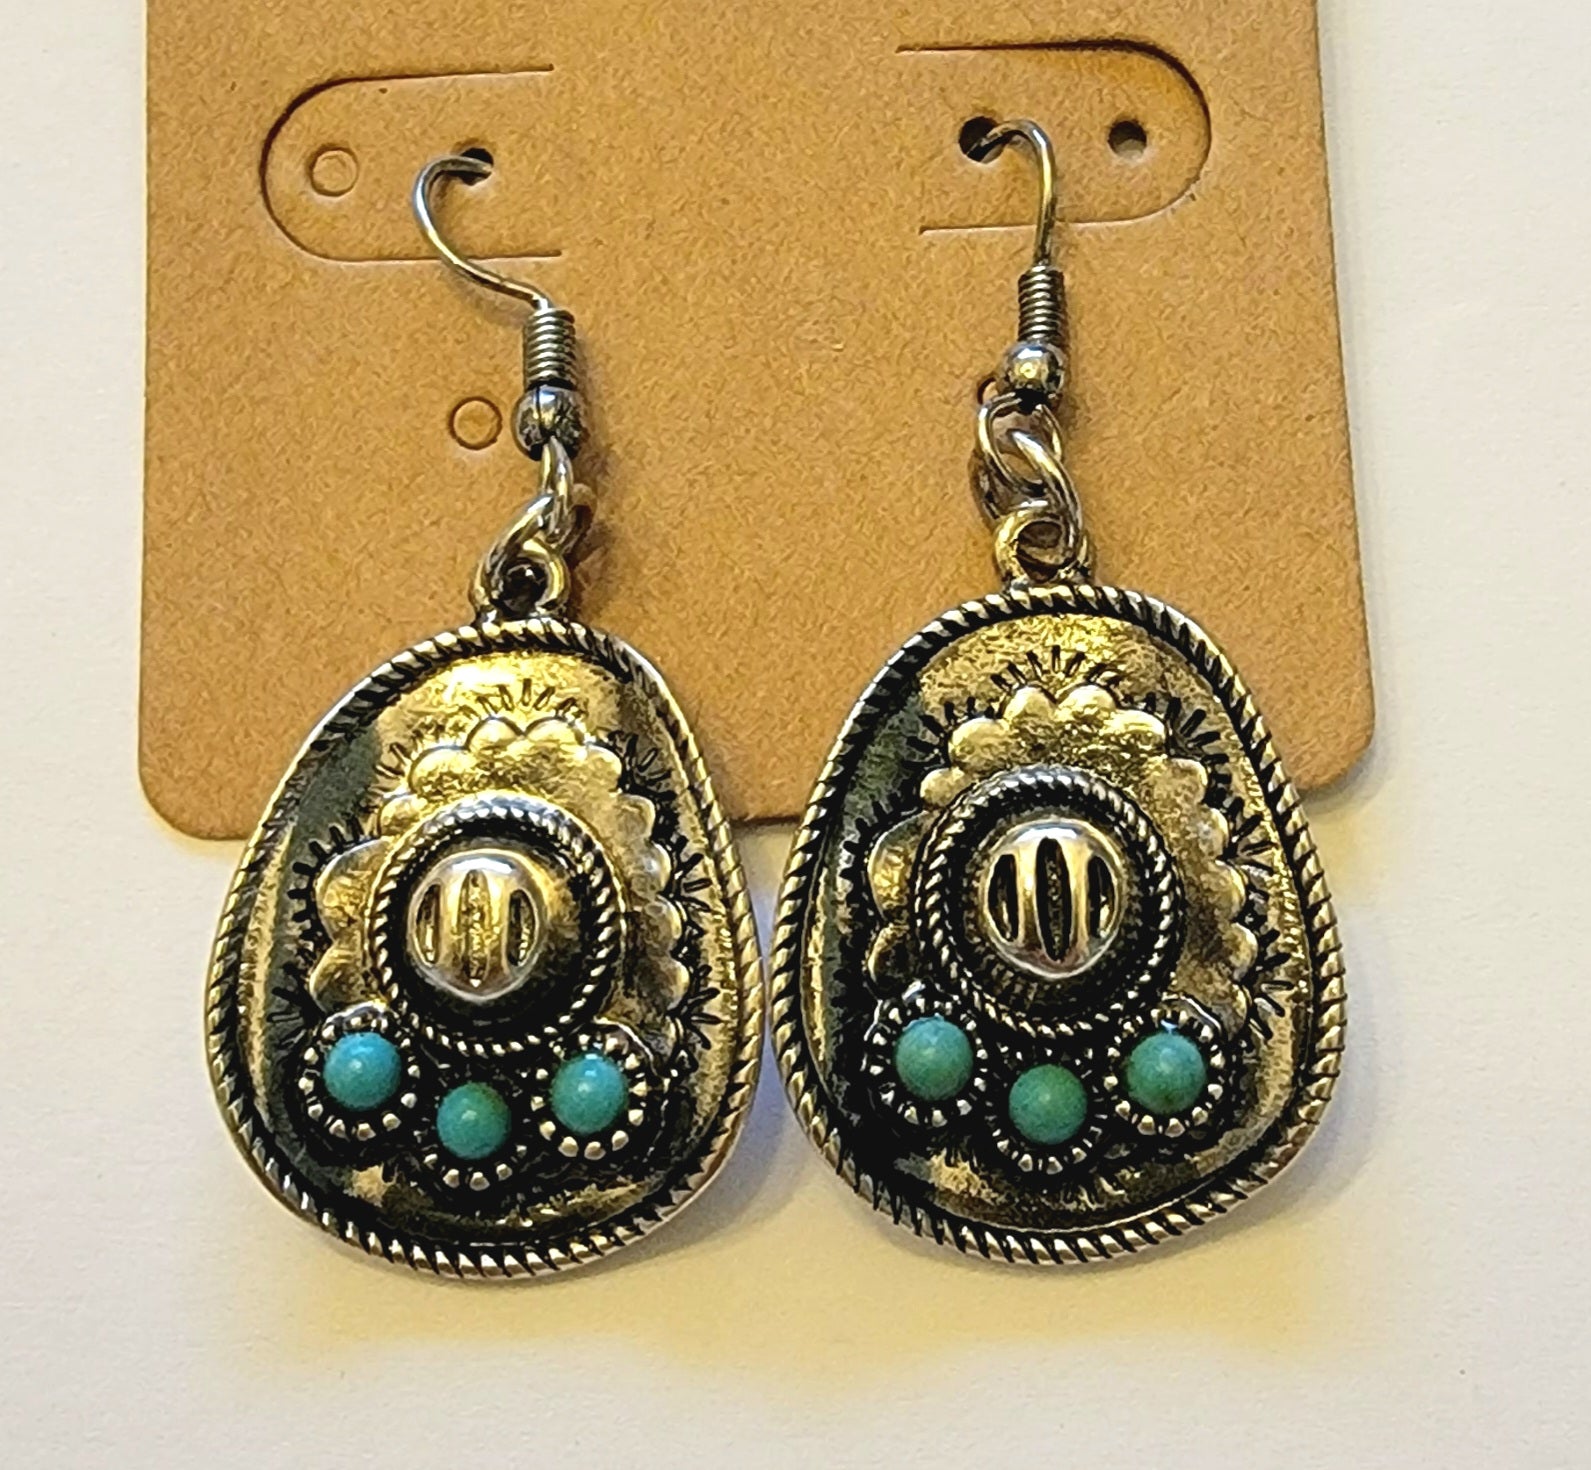 Silver Cowboy Hat with Turquoise Earrings